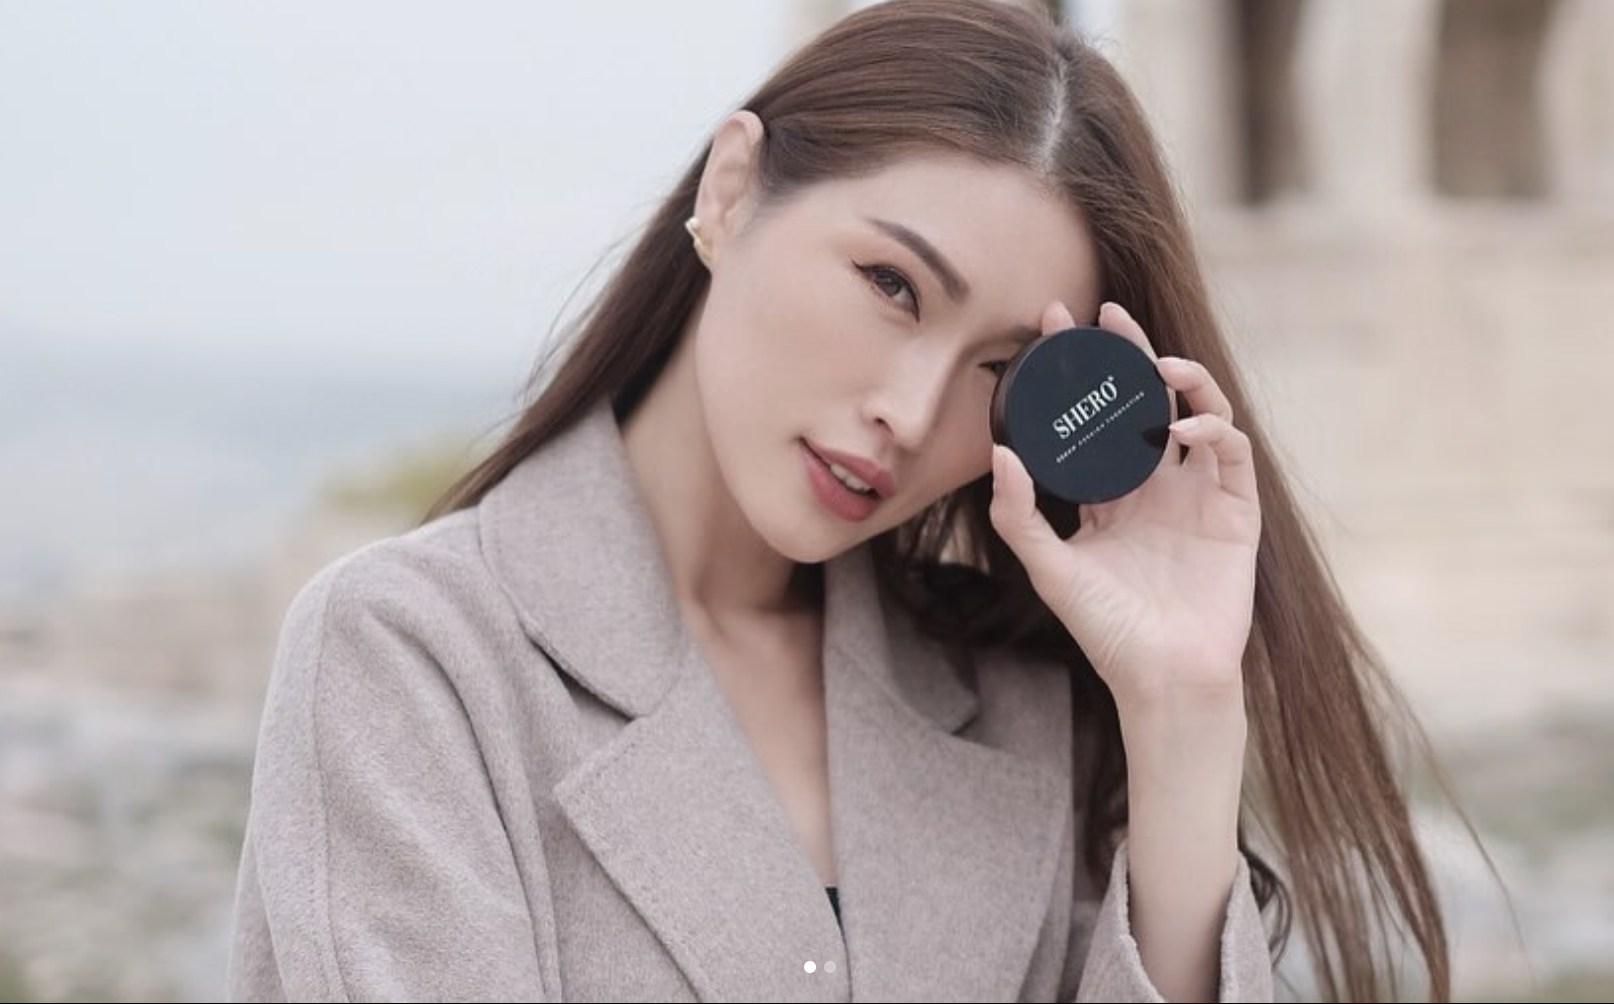 Shero x Flybear – Amber Chia’s Cosmetic Brand Grows To New Heights With Professional Fulfillment